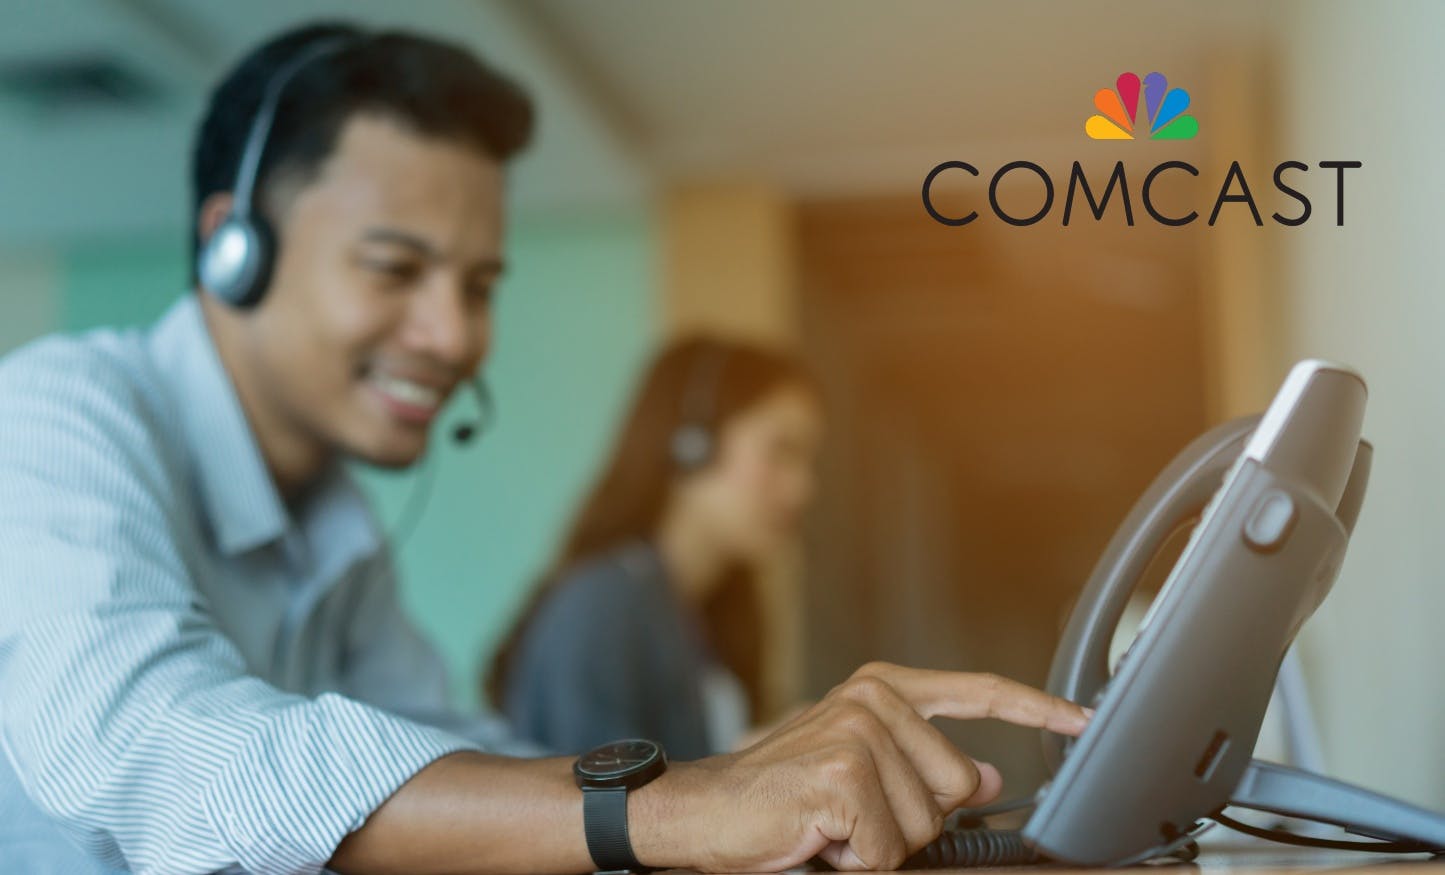 Comcast Review: Should I Make The Switch? 